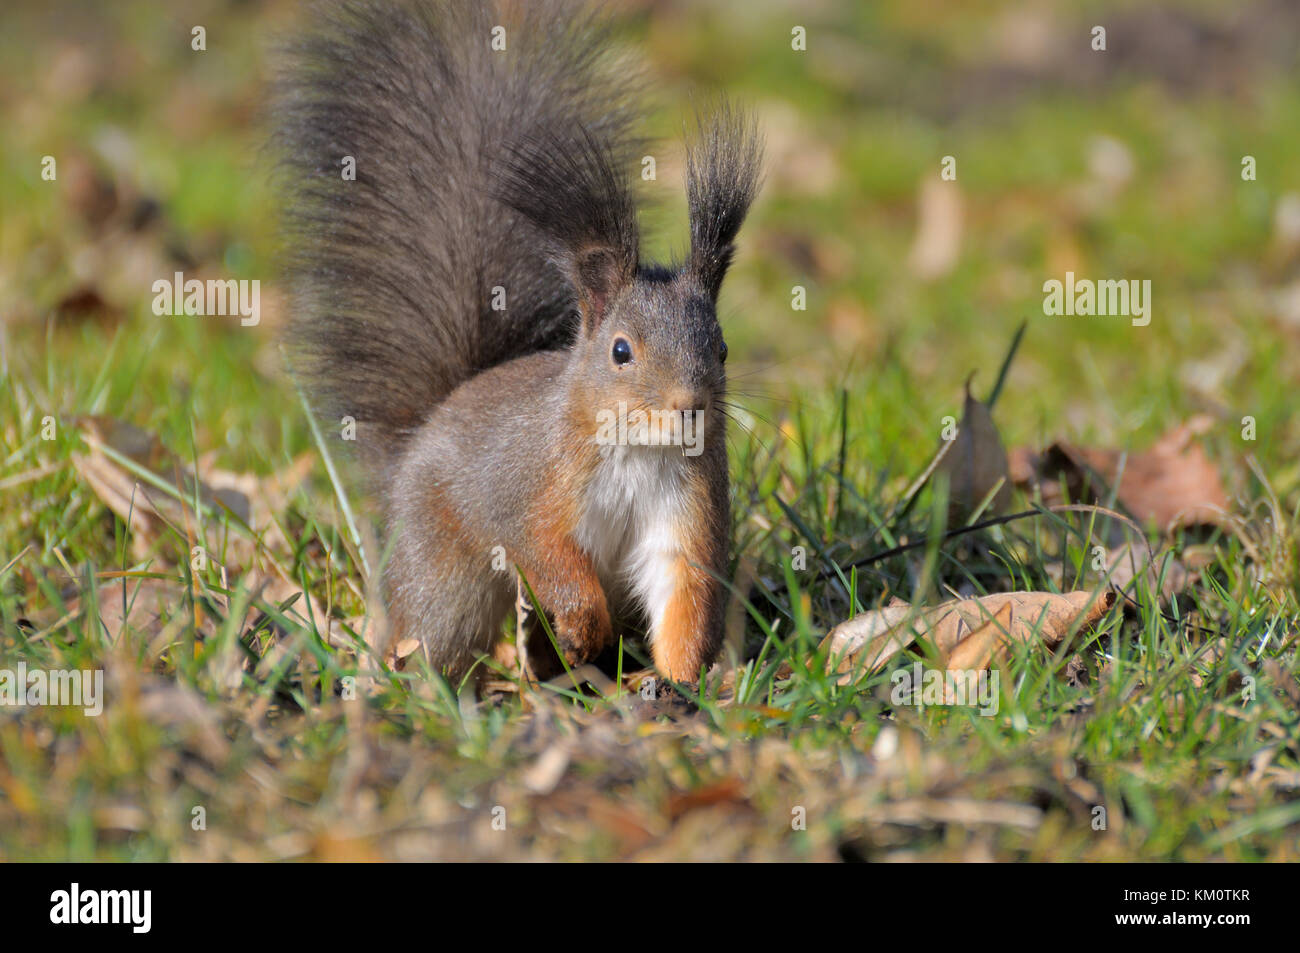 Red forest squirrel playing outdoors. Stock Photo